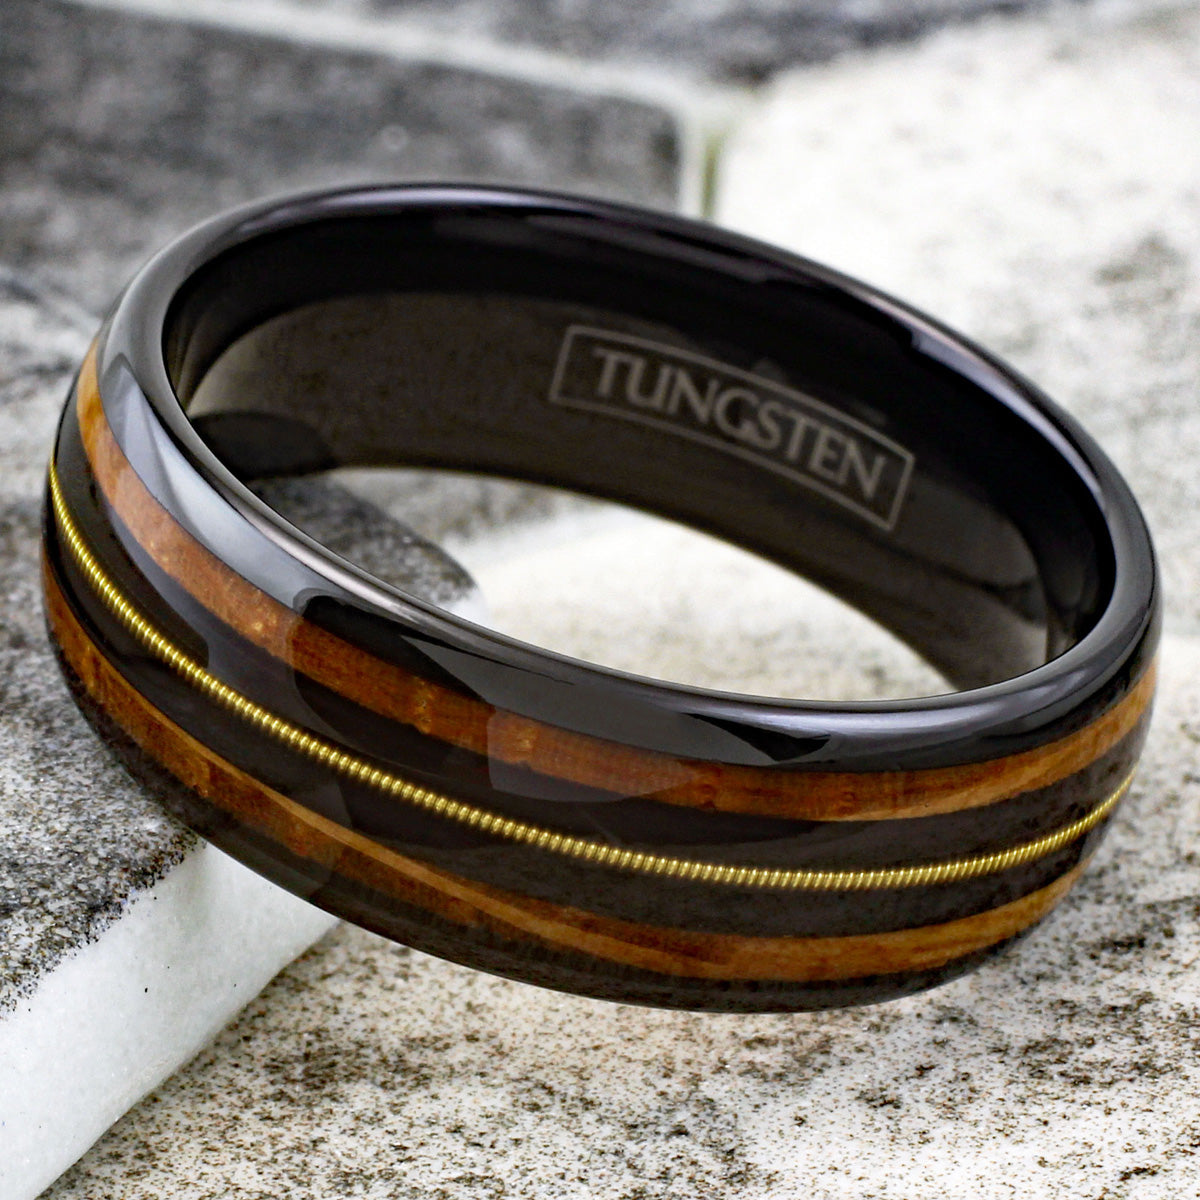 Awesome Polished Black Tungsten Low Dome Ring with Genuine Guitar String On Black Between Whiskey Barrel Oak Wood Inlays.